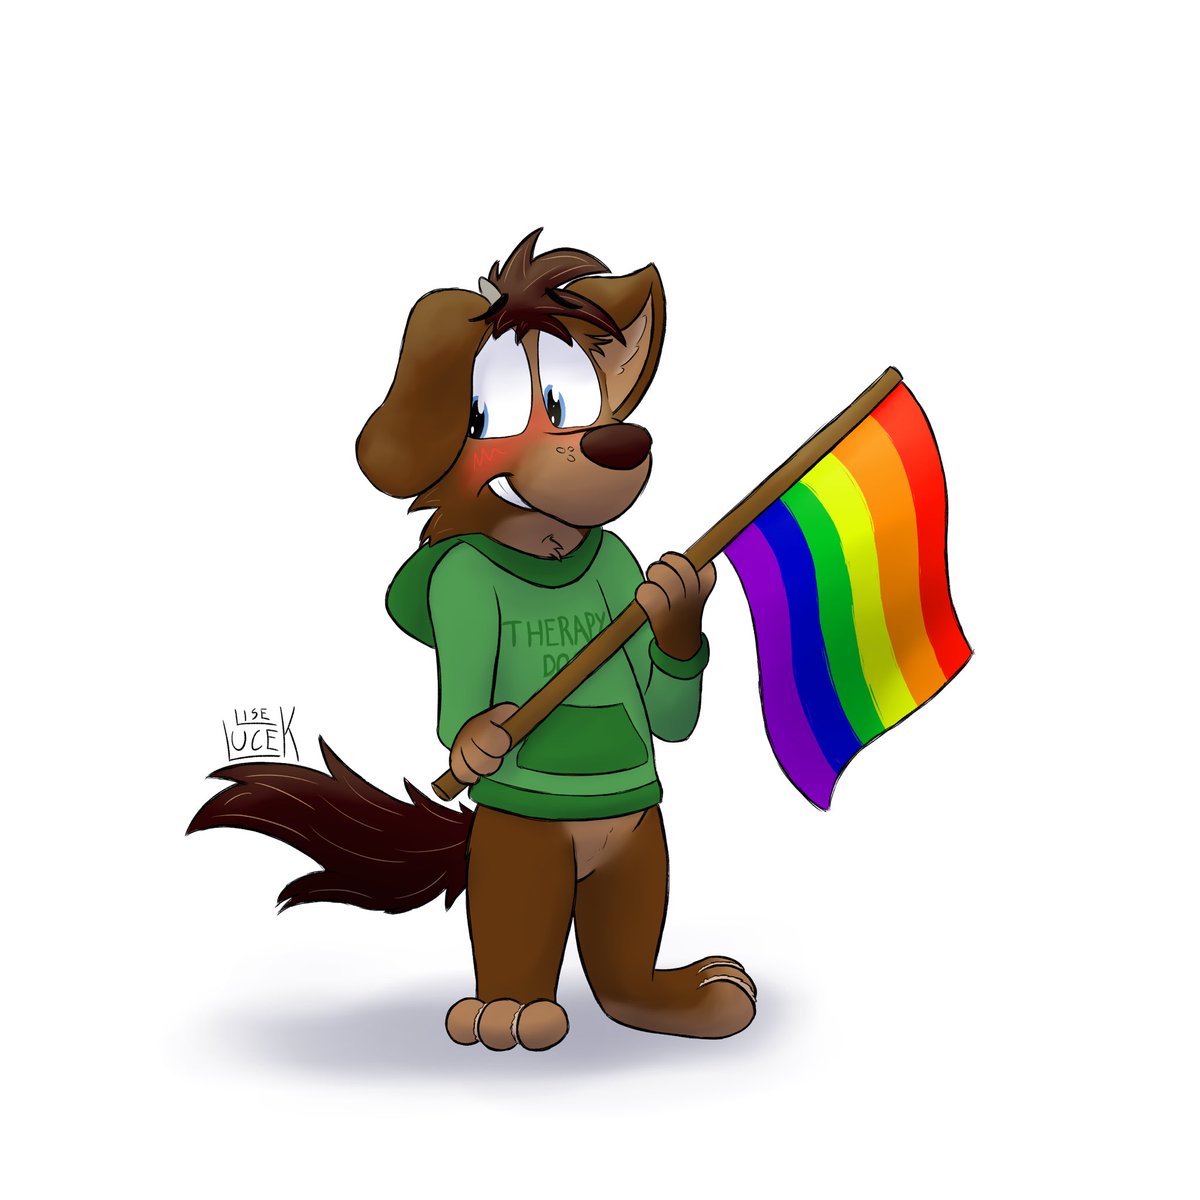 dear LGBTQAI+ frens,

the situation for TRANS persons gets steadily more difficult, please REMEMBER:

if you feel hopeless, PLEASE reach out, there are STILL people who will HELP!

if you are hesitant to call...

doggo is here for lending a floppy ear and a fluffy shoulder to…